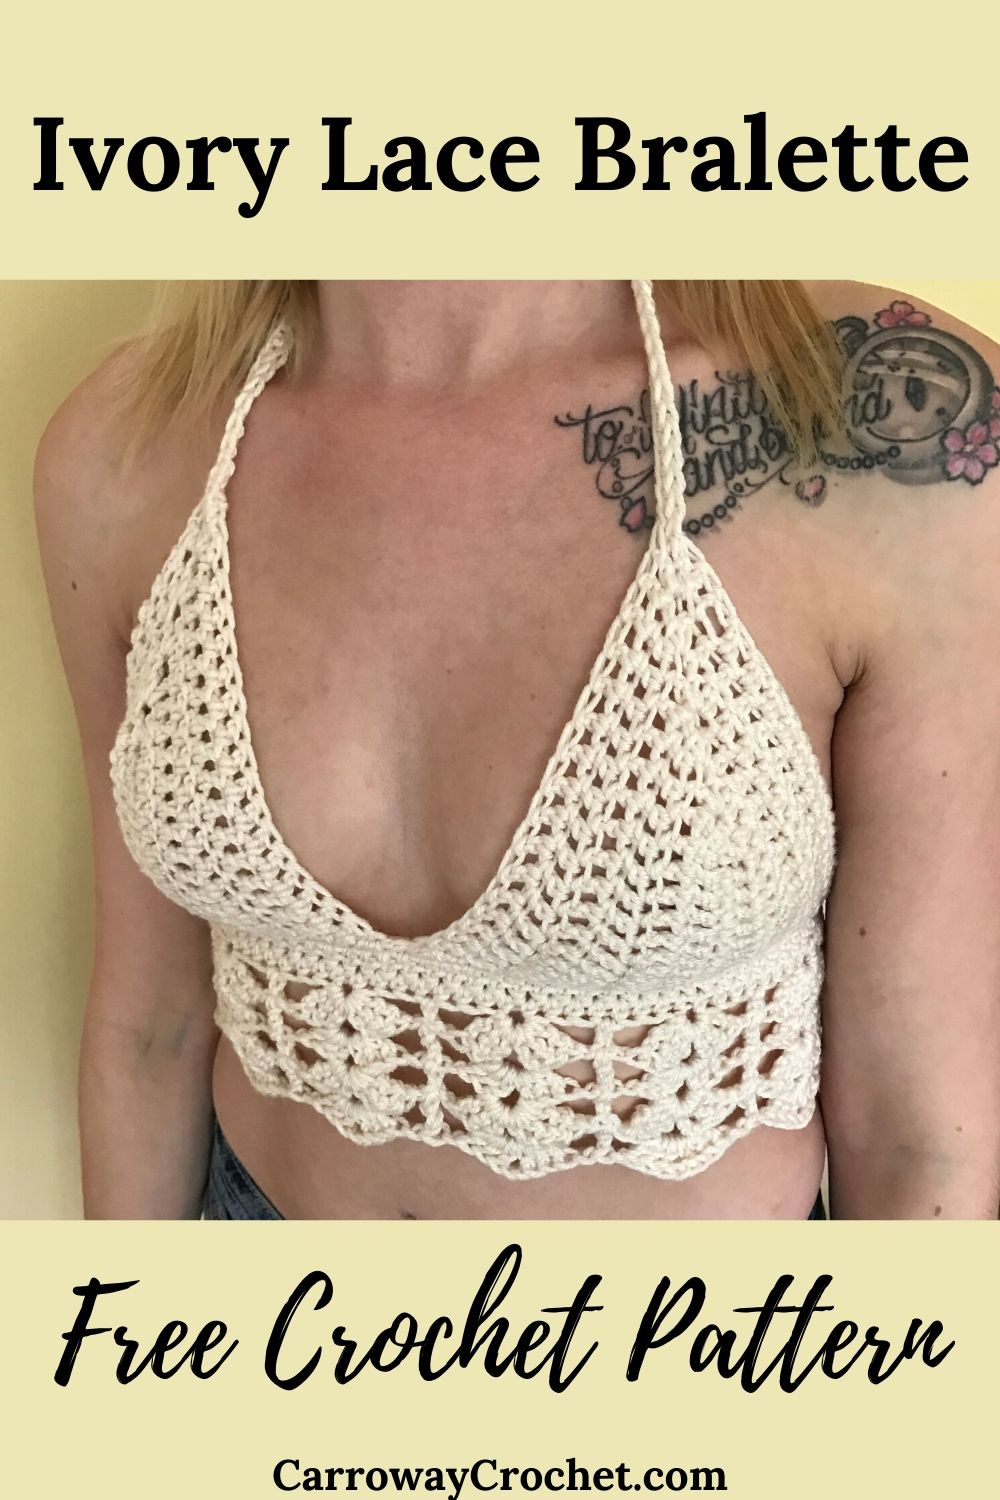 How to crochet a right bra cup to a bikini top (Tutorial Video)